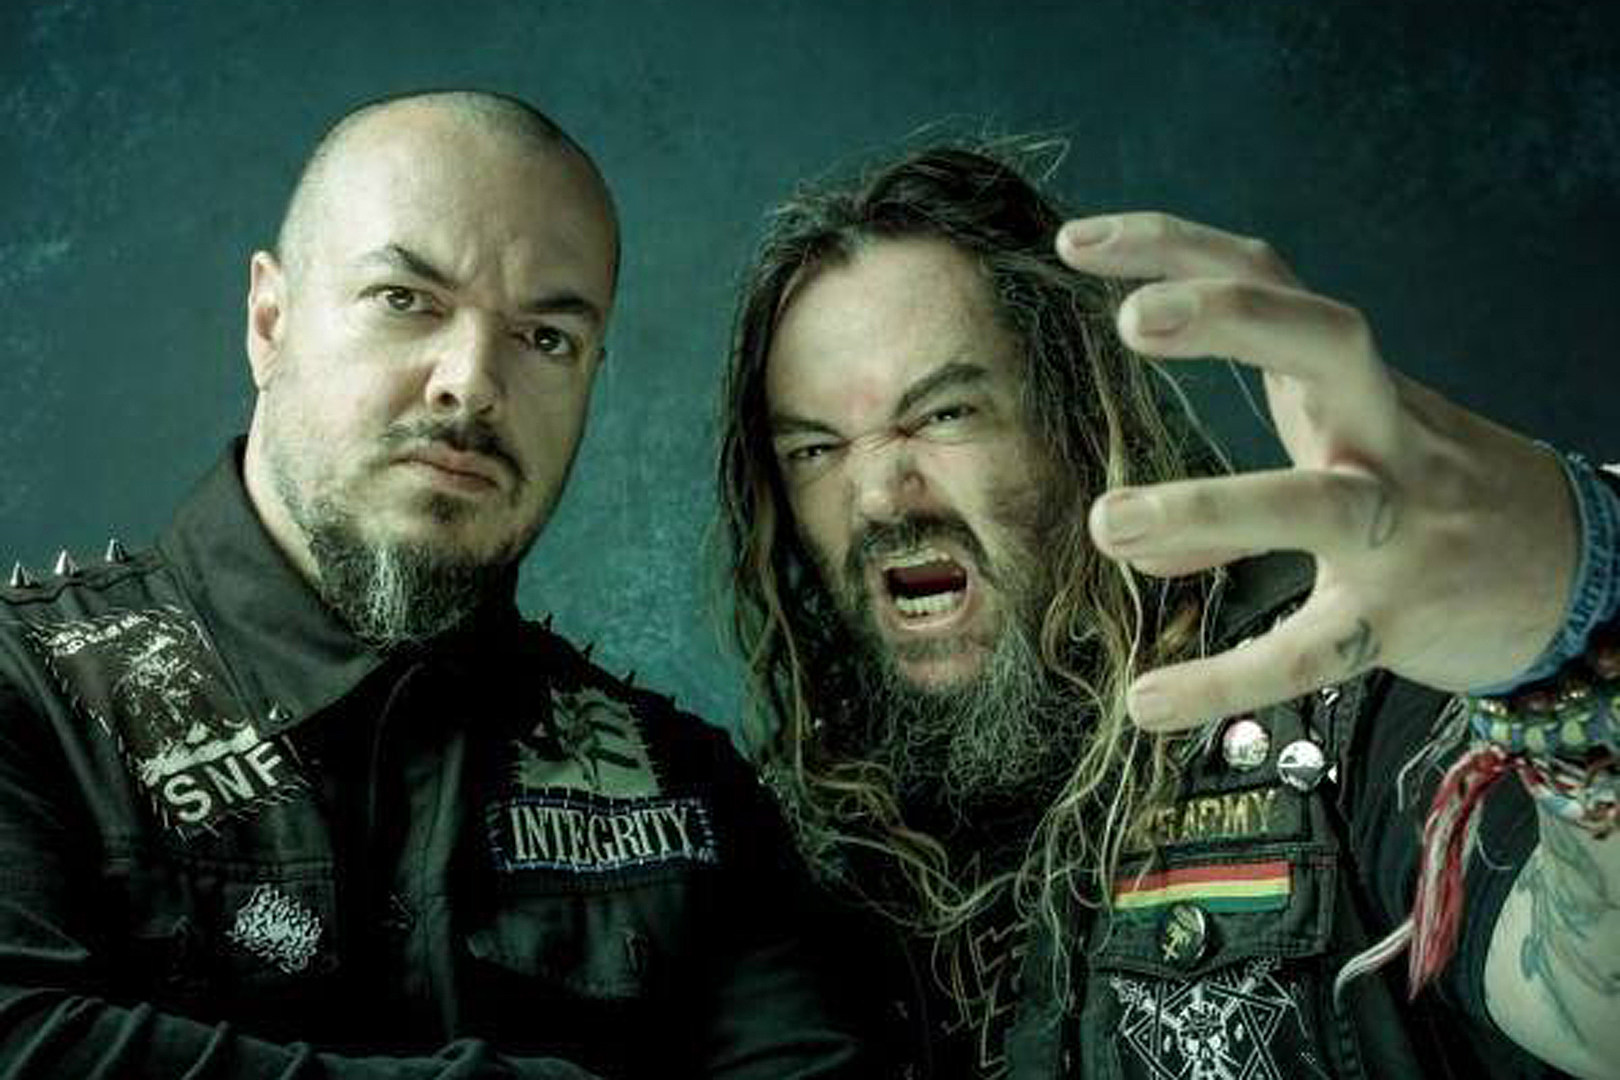 Max Cavalera Responds to Sh*tstorm Caused by Cutting off His